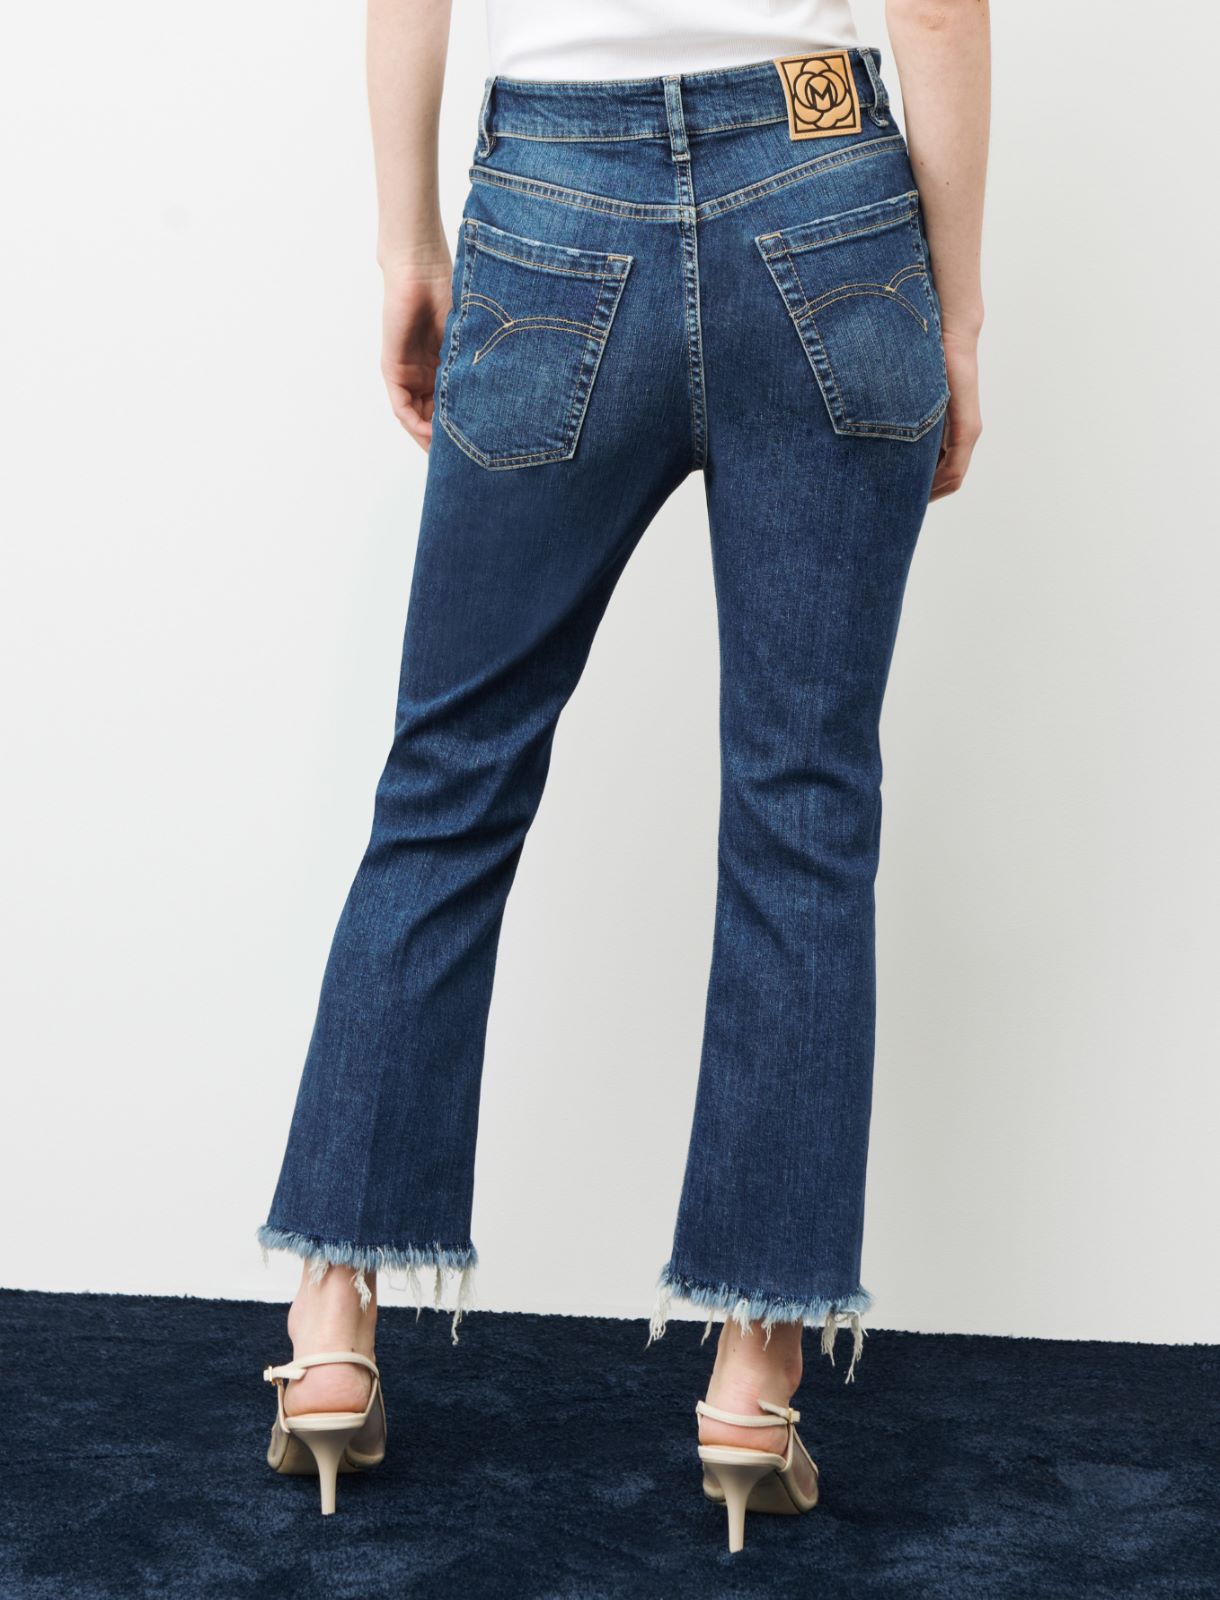 Jeans flare - Blue jeans - Marella - 2